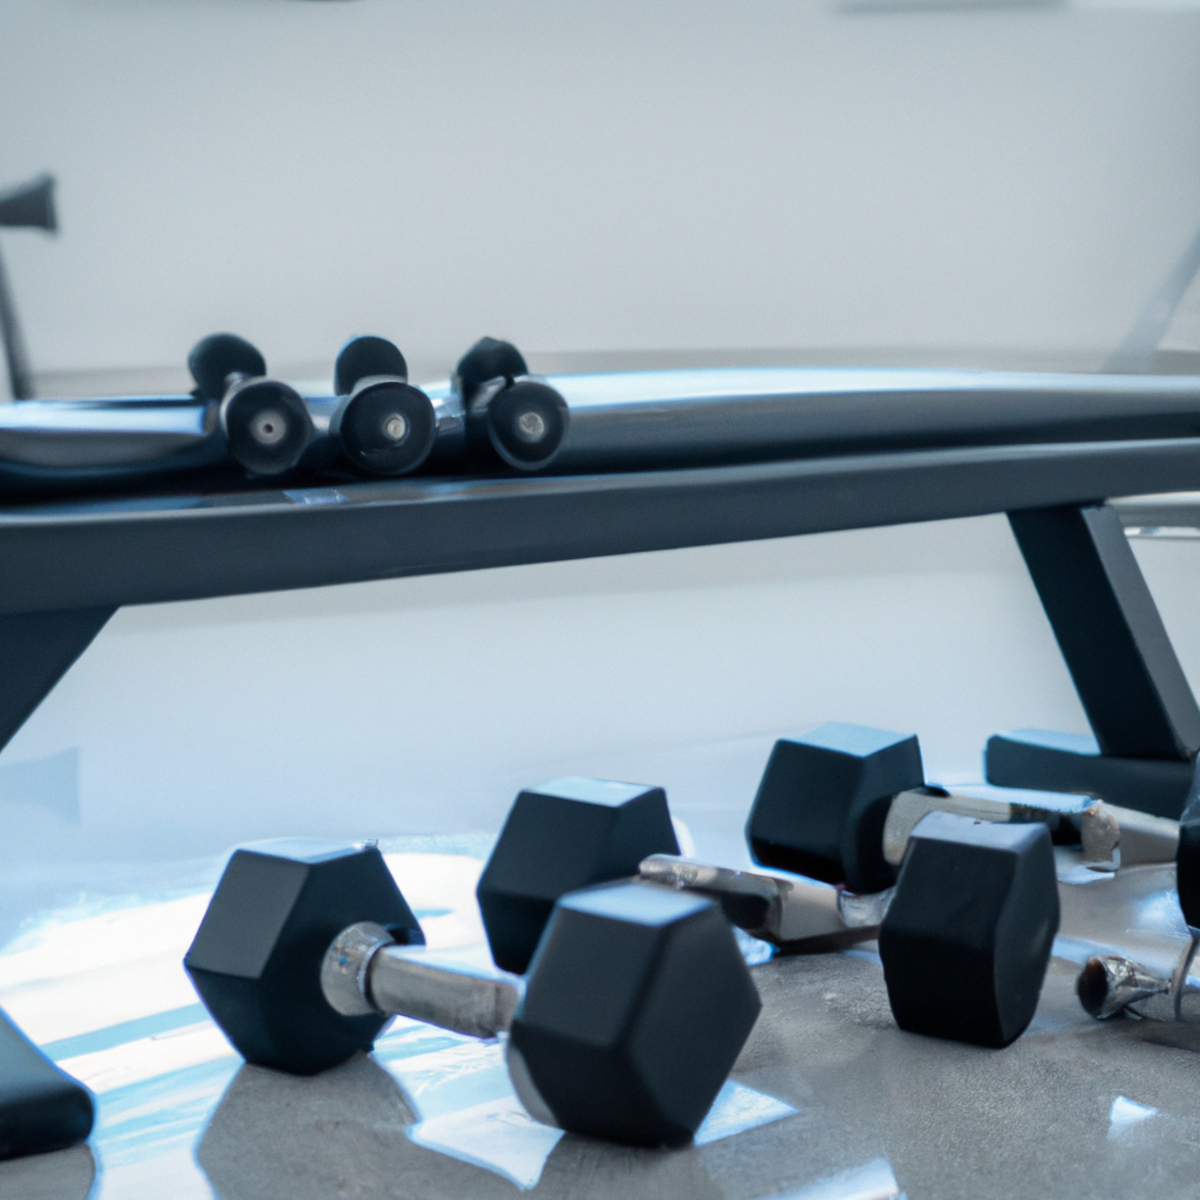 The photo captures a set of dumbbells resting on a weight bench, surrounded by various fitness equipment such as resistance bands, a stability ball, and a foam roller. The lighting highlights the shiny metal of the weights, emphasizing their weight and strength. The composition of the photo draws the viewer's attention to the center of the image, where the dumbbells sit, inviting the reader to imagine themselves picking them up and beginning their own resistance training journey. The overall effect is one of motivation and inspiration, encouraging readers to take the first step towards building stronger and leaner muscles.